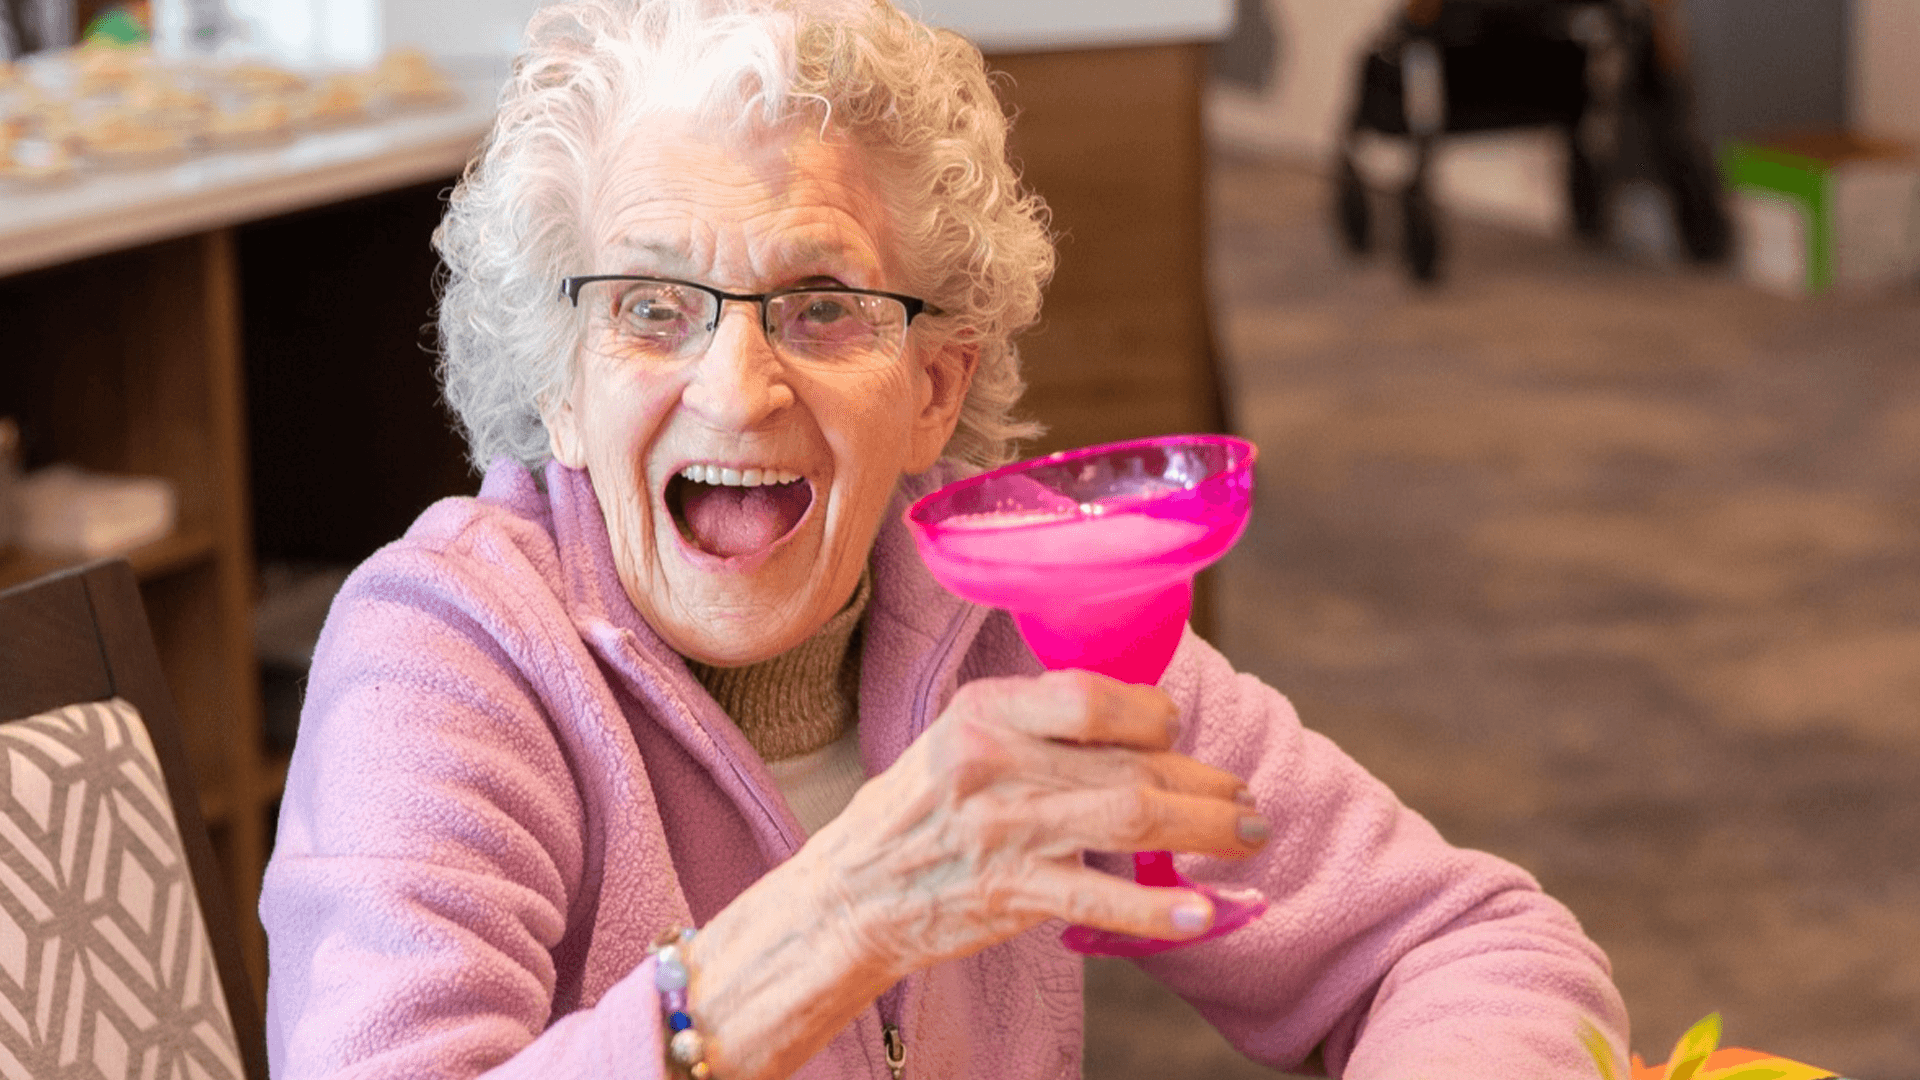 Senior lady smiling holding a cocktail in a pink cup